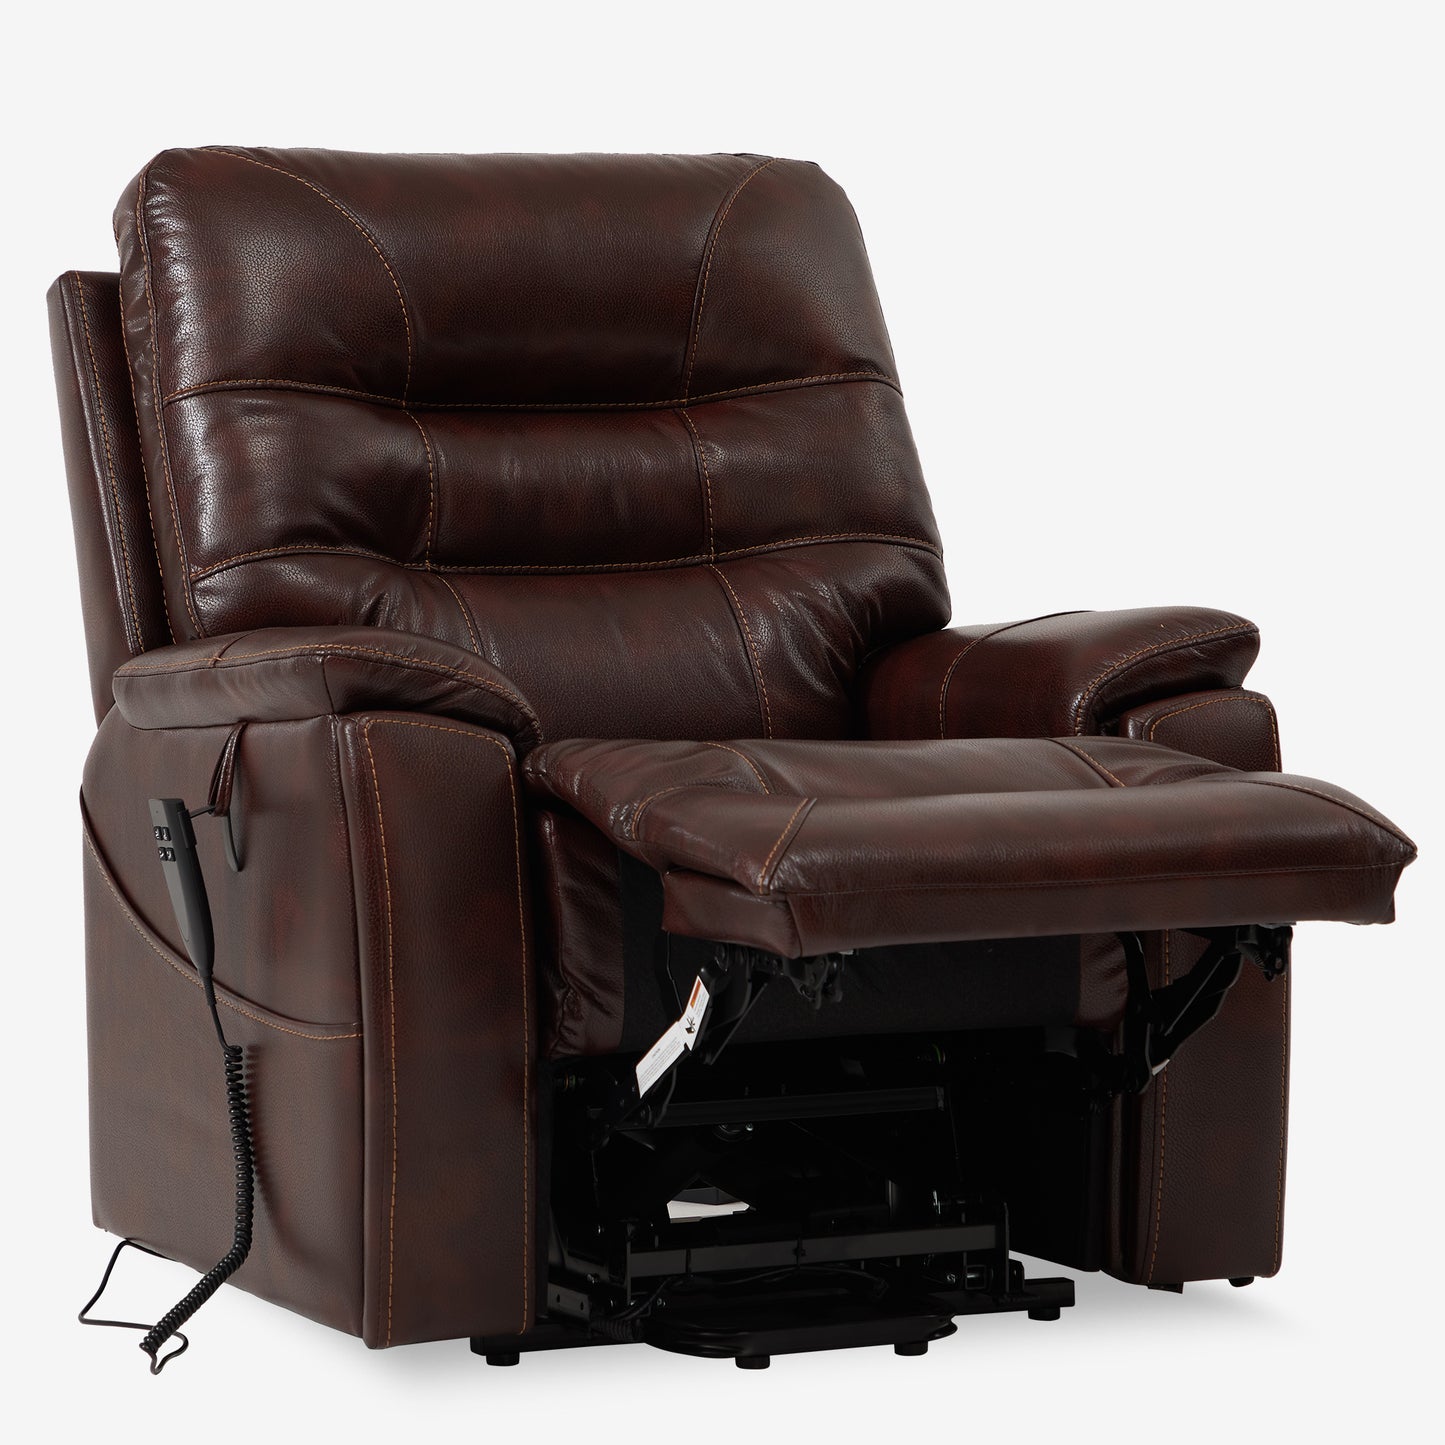 Extra Wide Heavy Duty Lift Chair With Cup Holder And Lay Flat